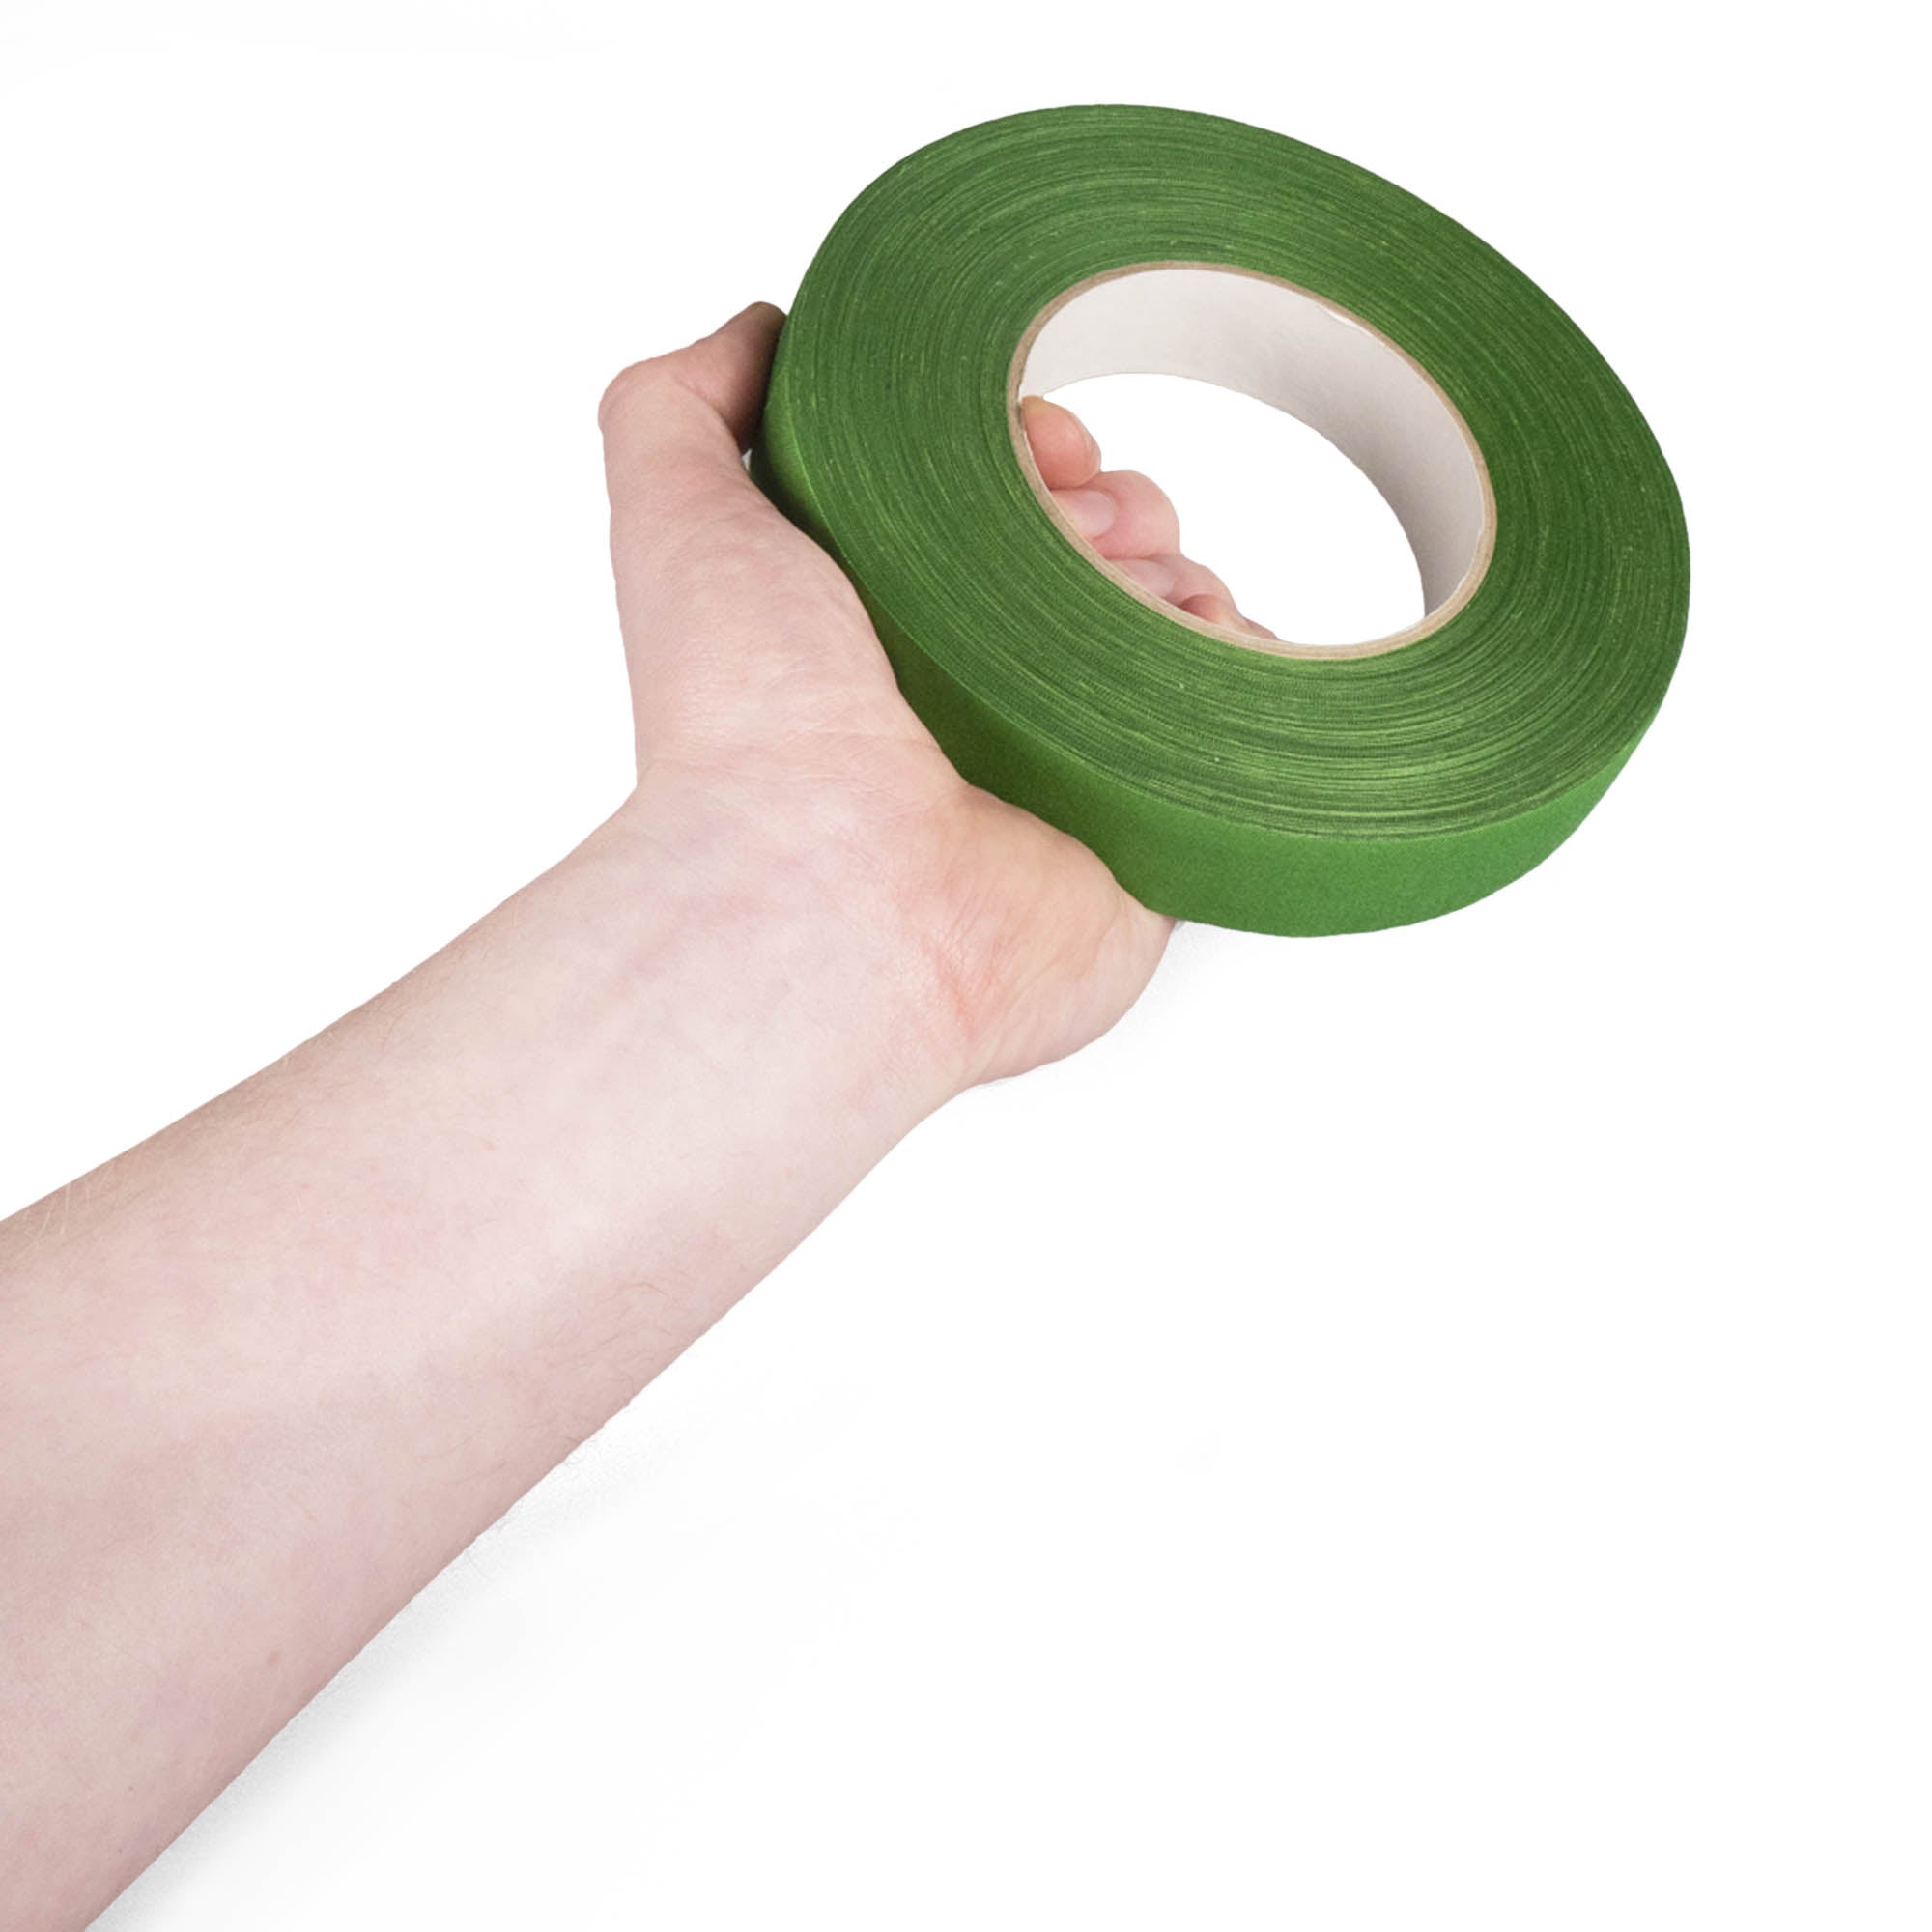 green 2.5cm wide tape in hand